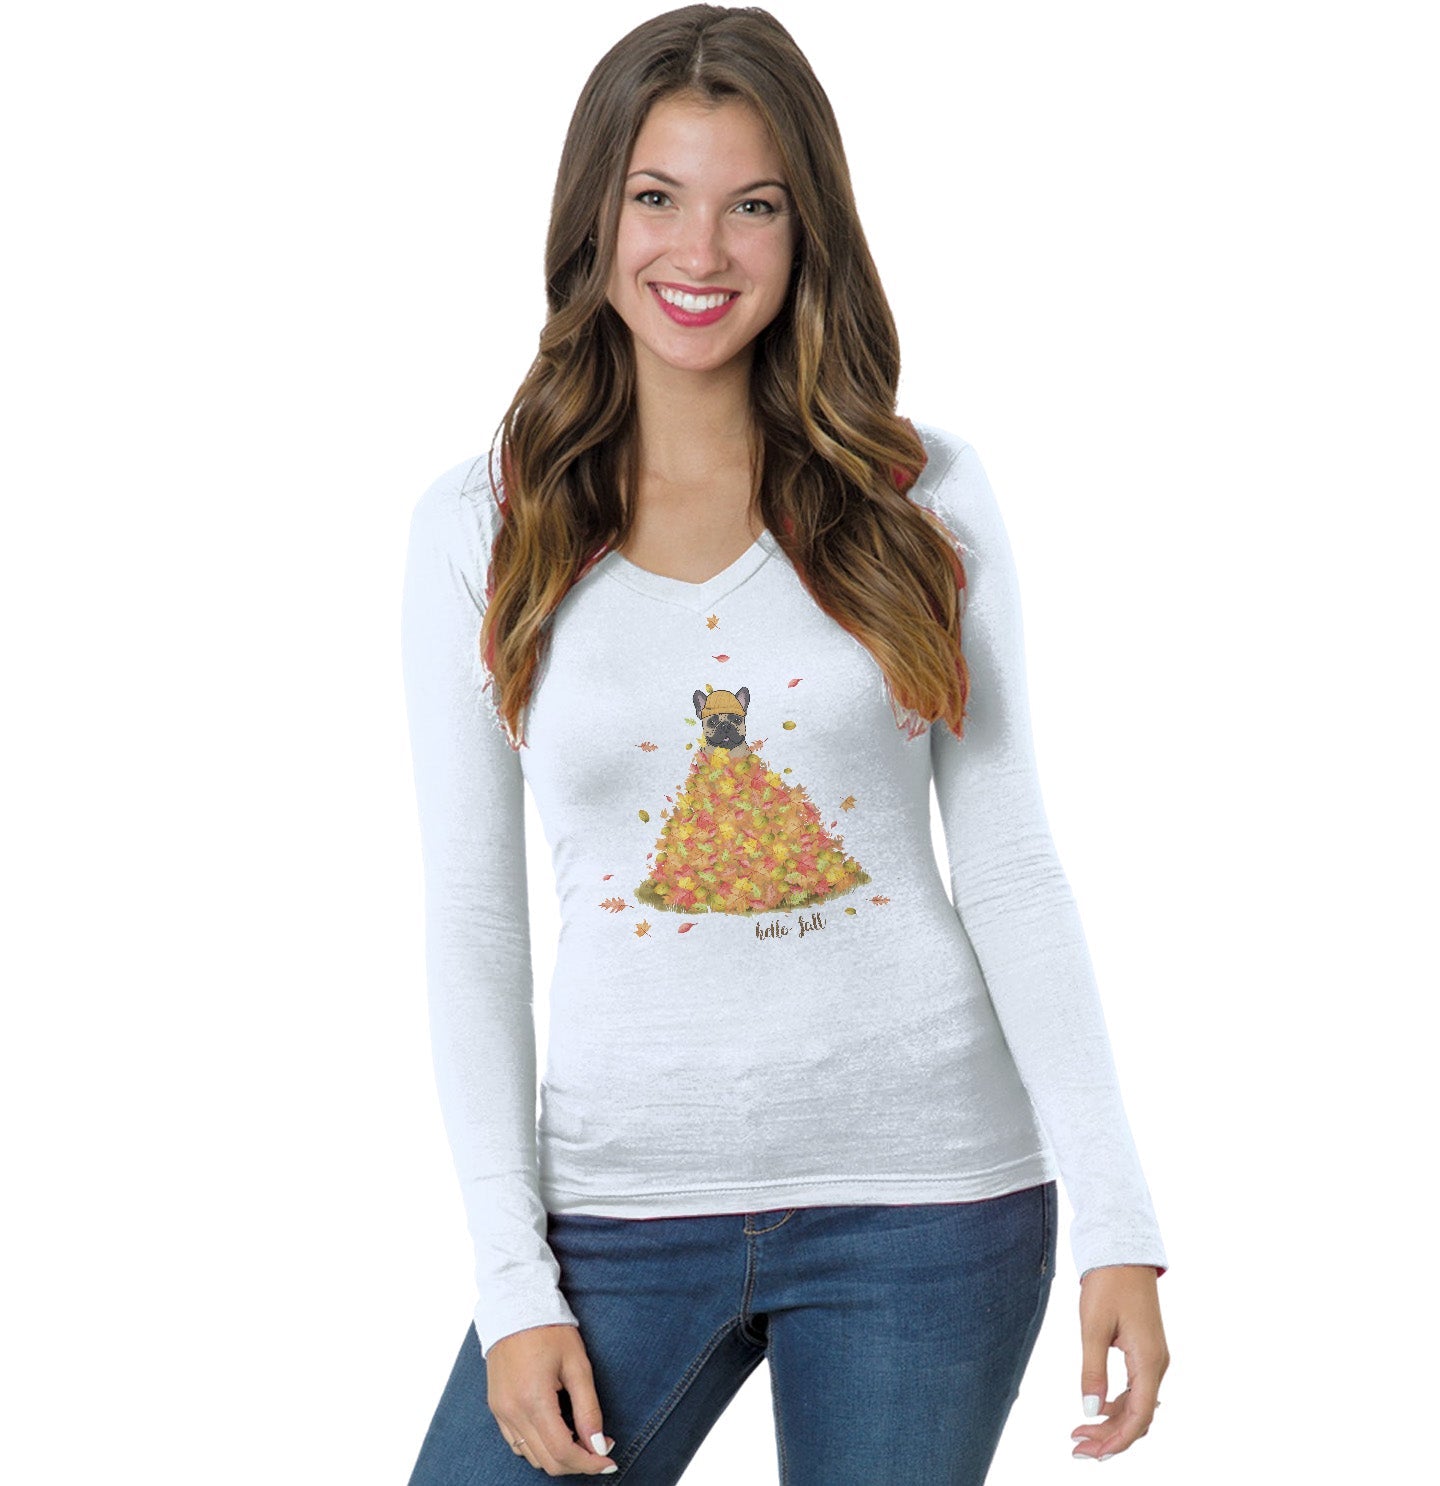 Leaf Pile and Frenchie - Women's V-Neck Long Sleeve T-Shirt